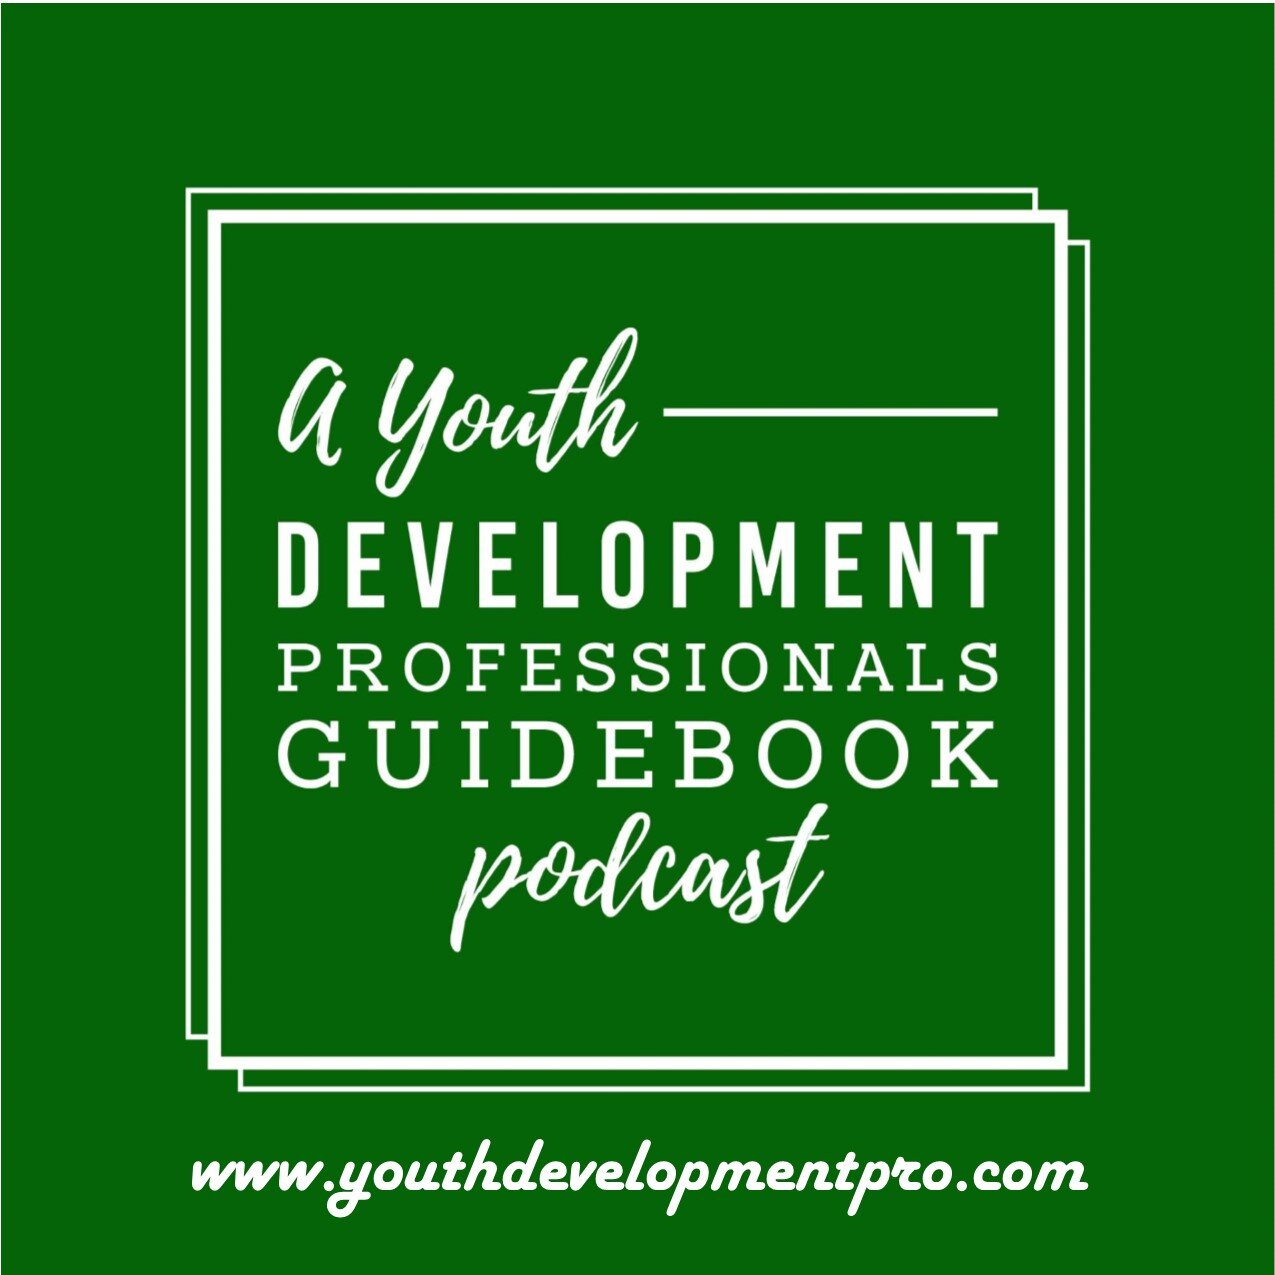 01:22 Michael & Al Talk about the Why of the YDPro Guidebook